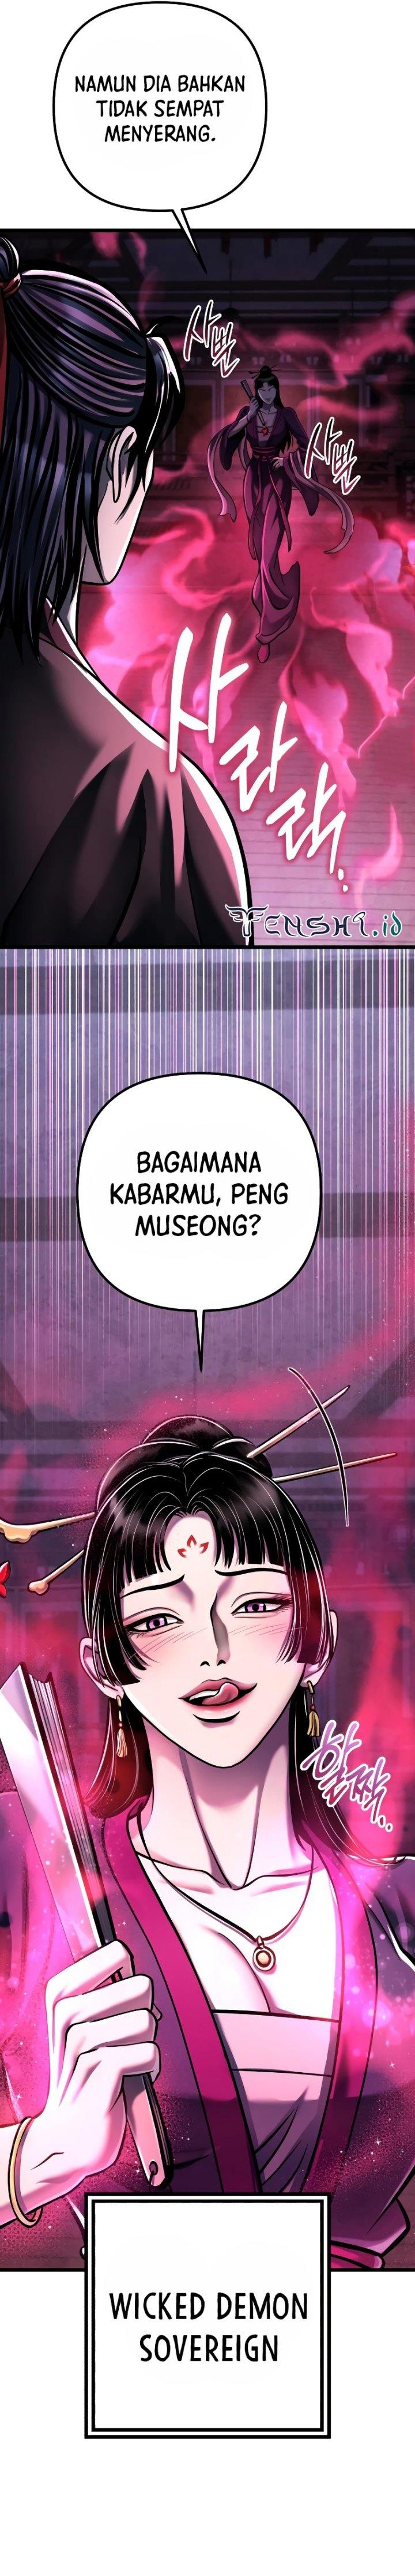 Ha Buk Paeng’s Youngest Son Chapter 122